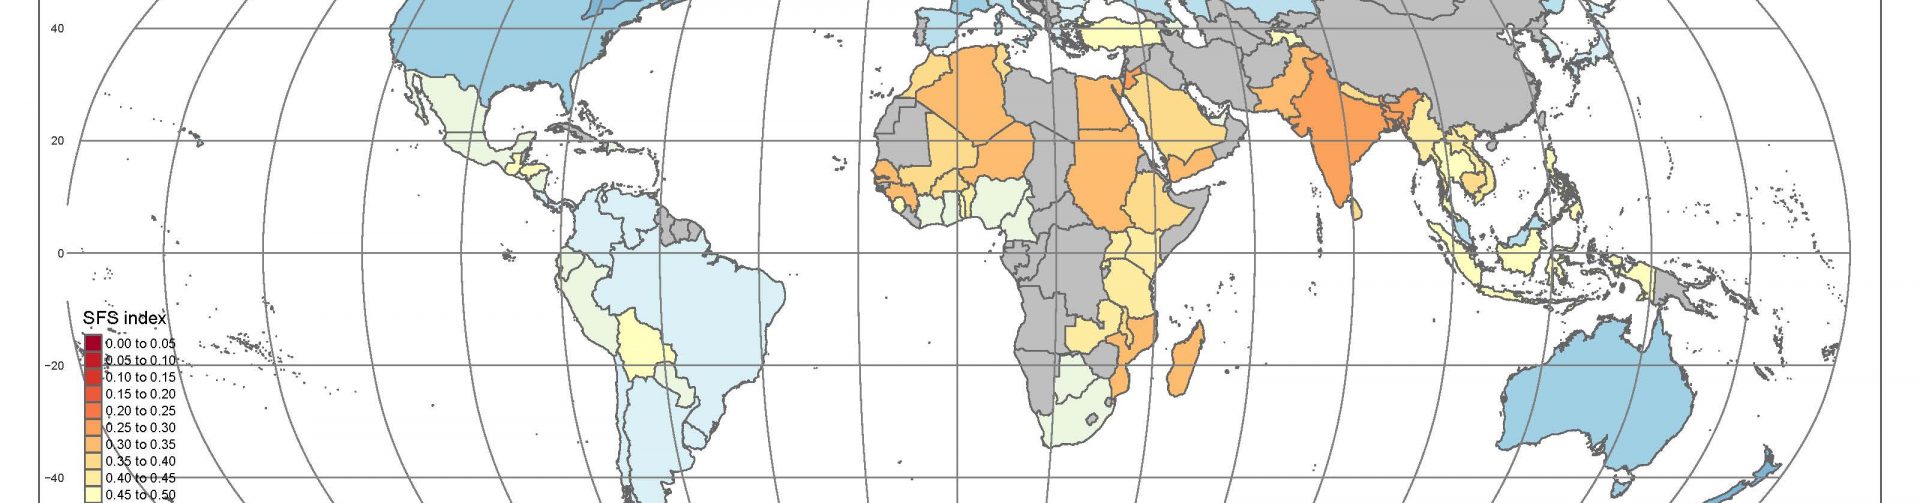 New World Map Rates Food Sustainability for Countries Across the Globe